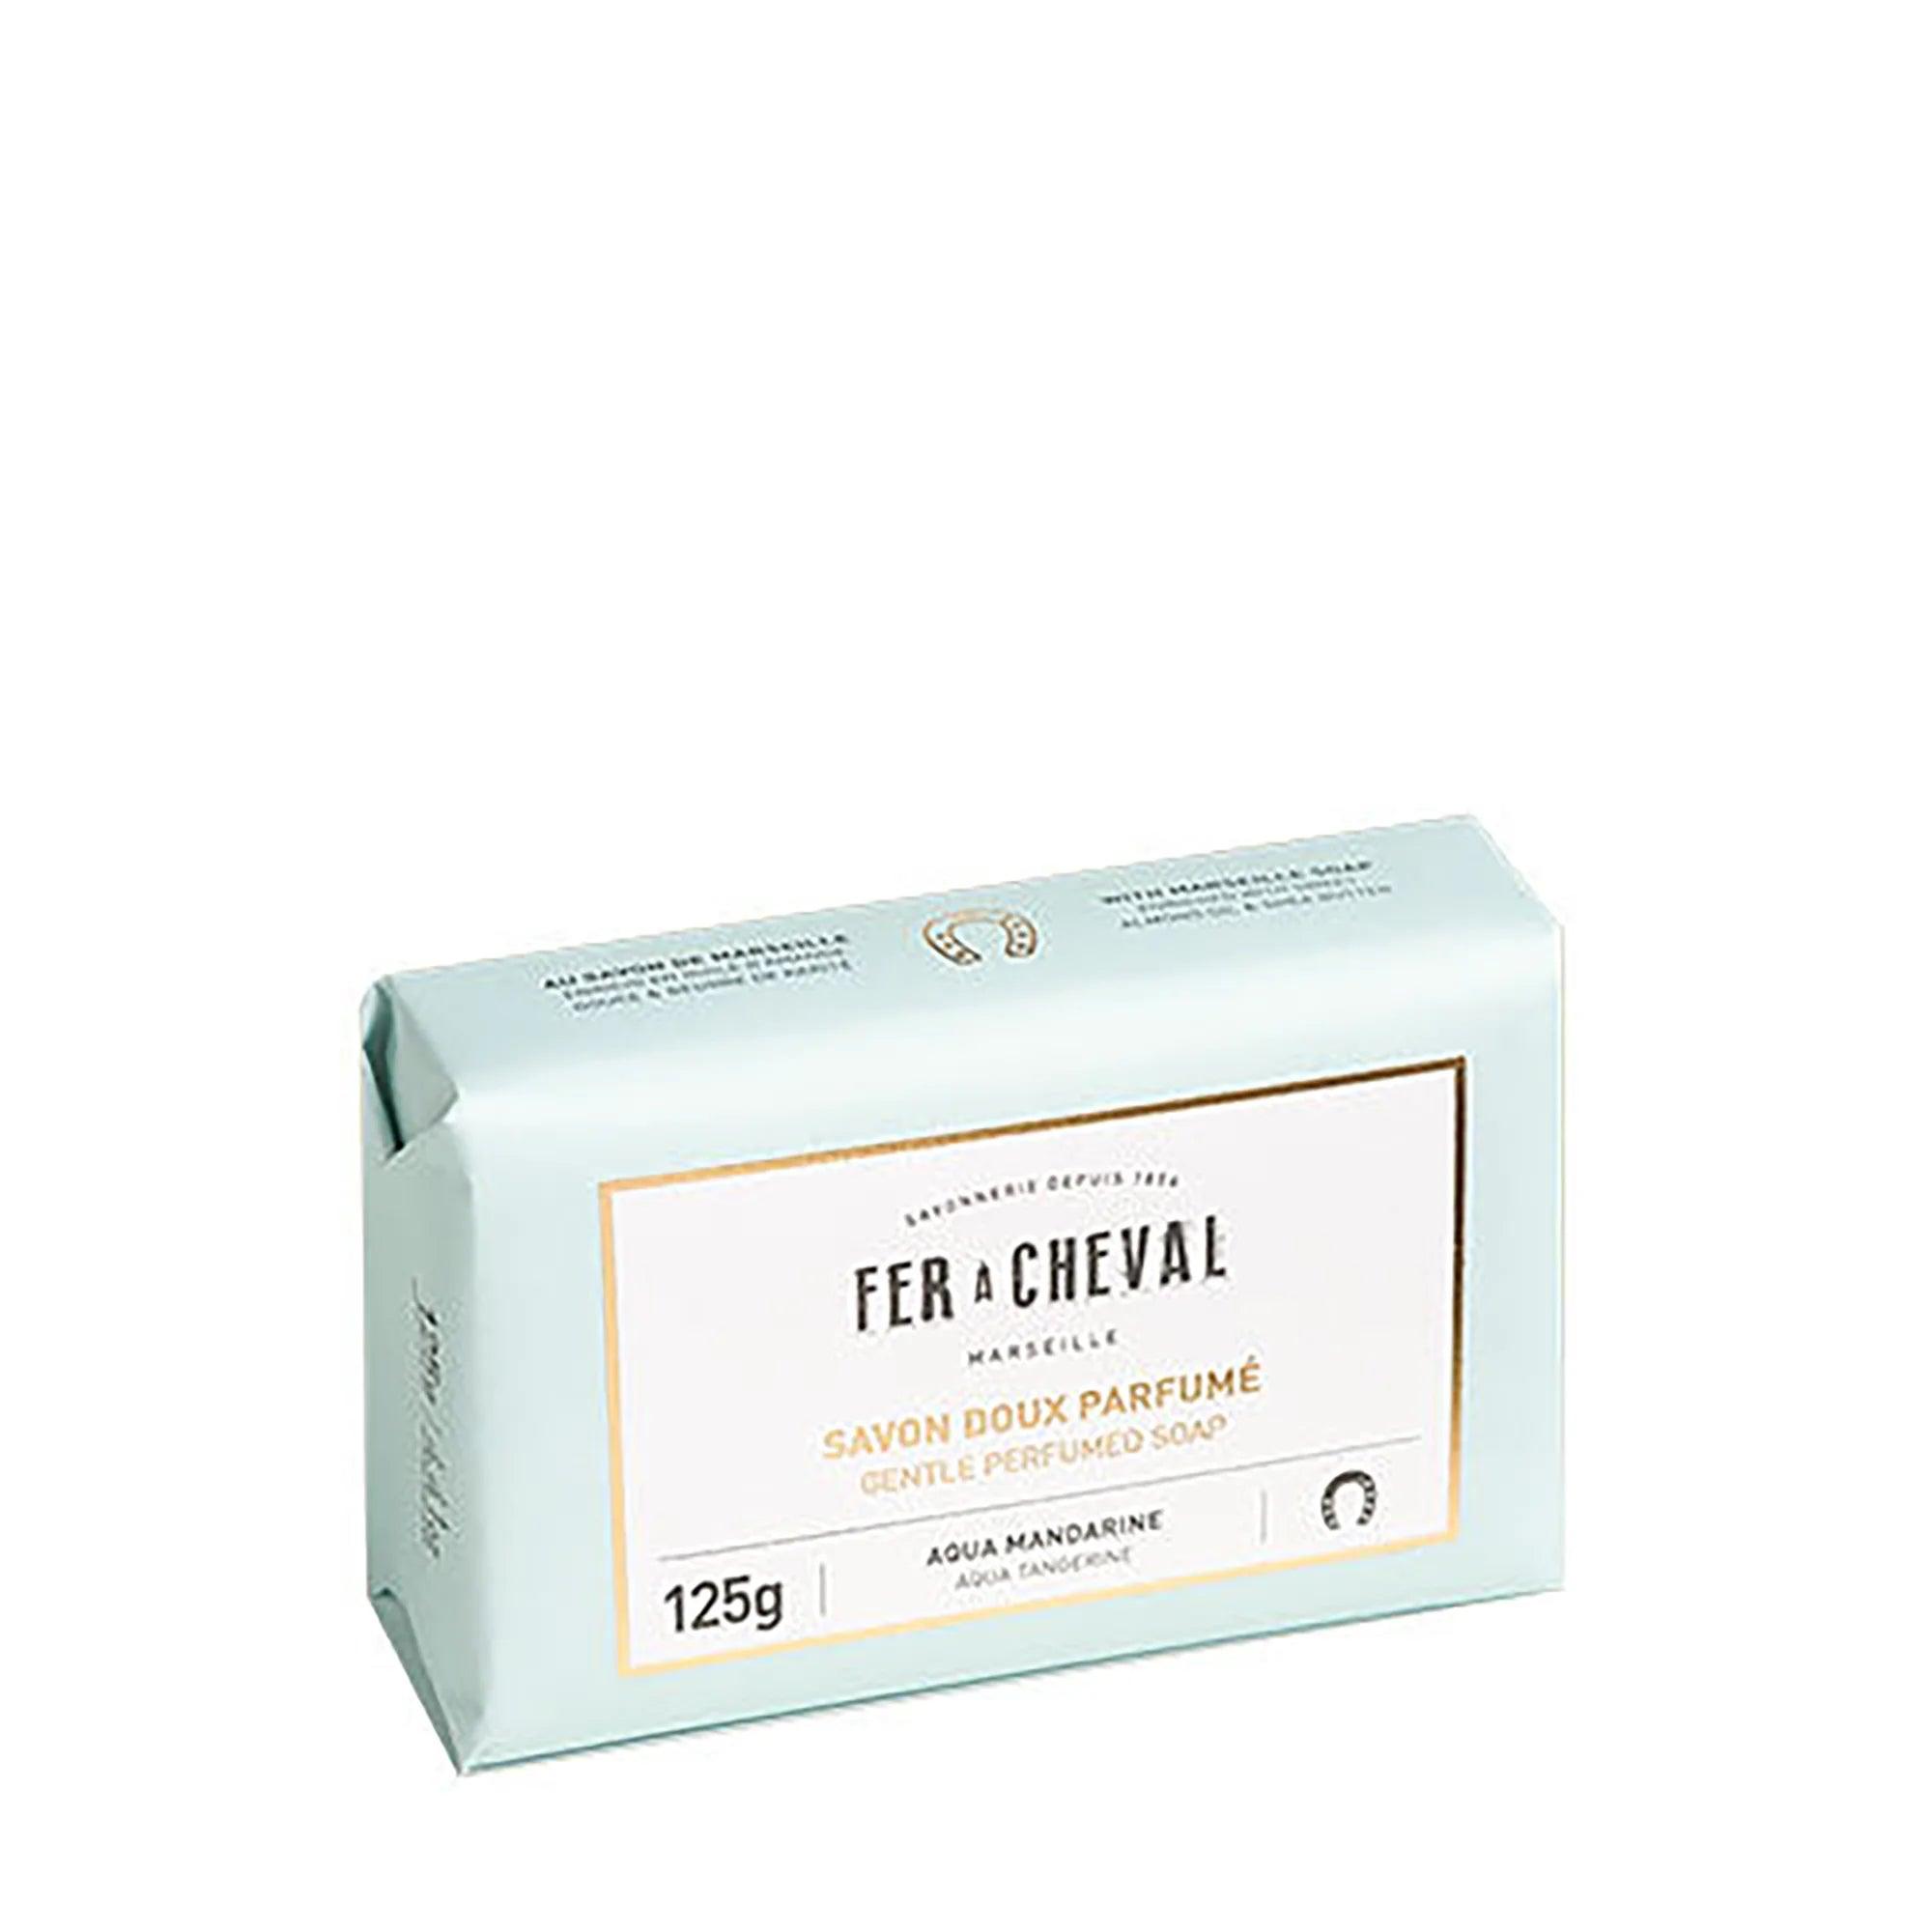 Fer A Cheval Gentle Perfumed Soap Aqua Tangerine 125g by Love Nature